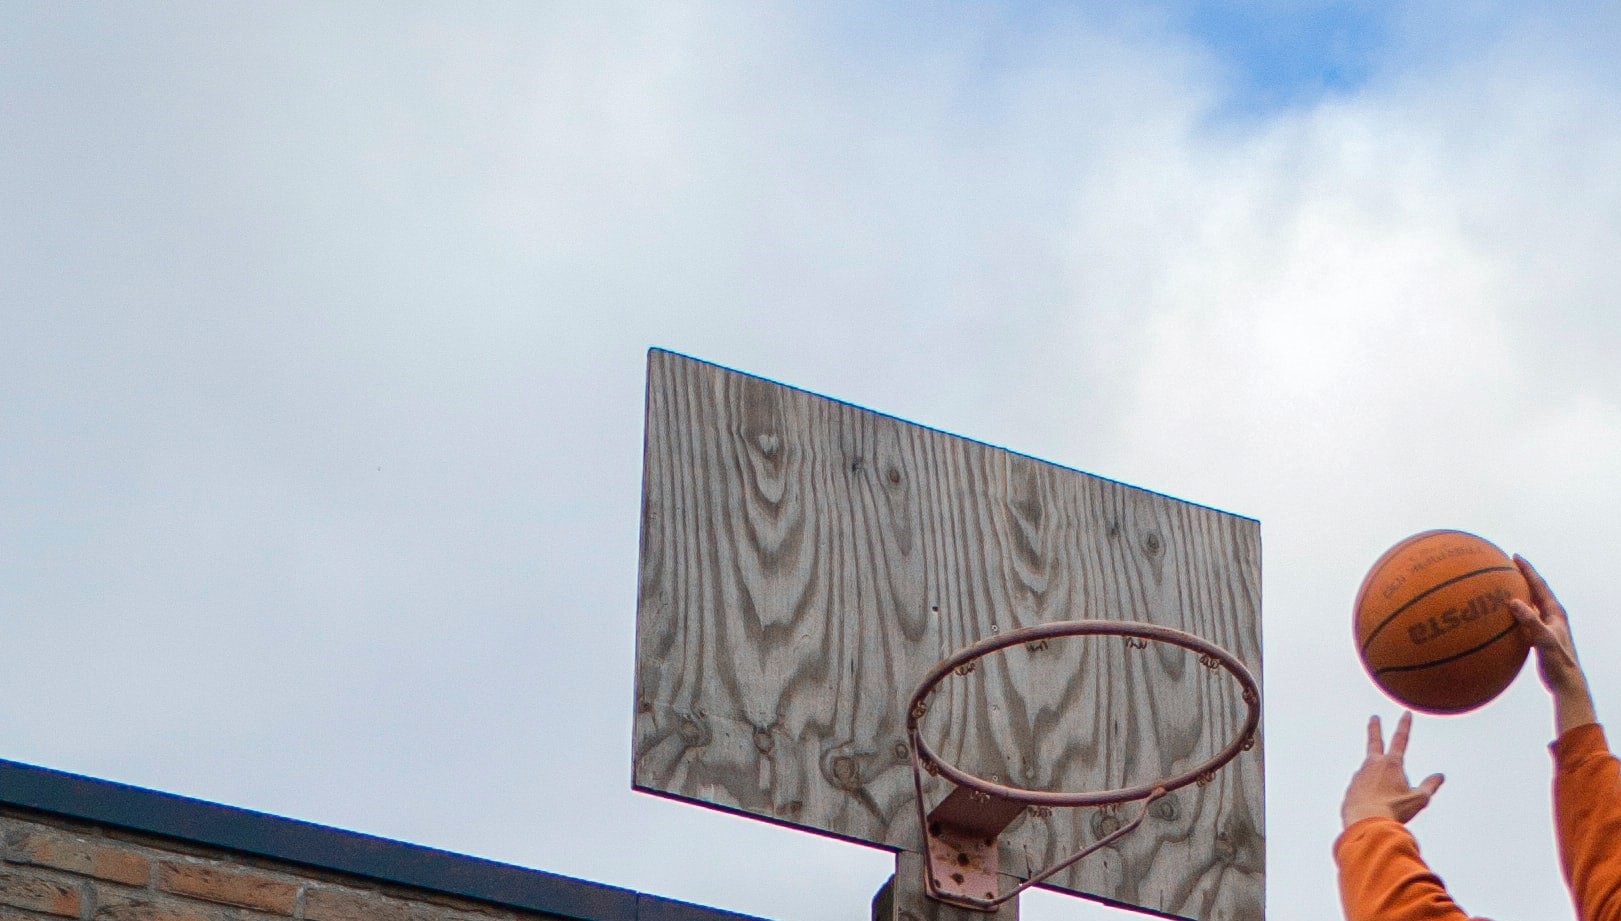 Image by brecht-deboosere slam dunking a basketball into a goal